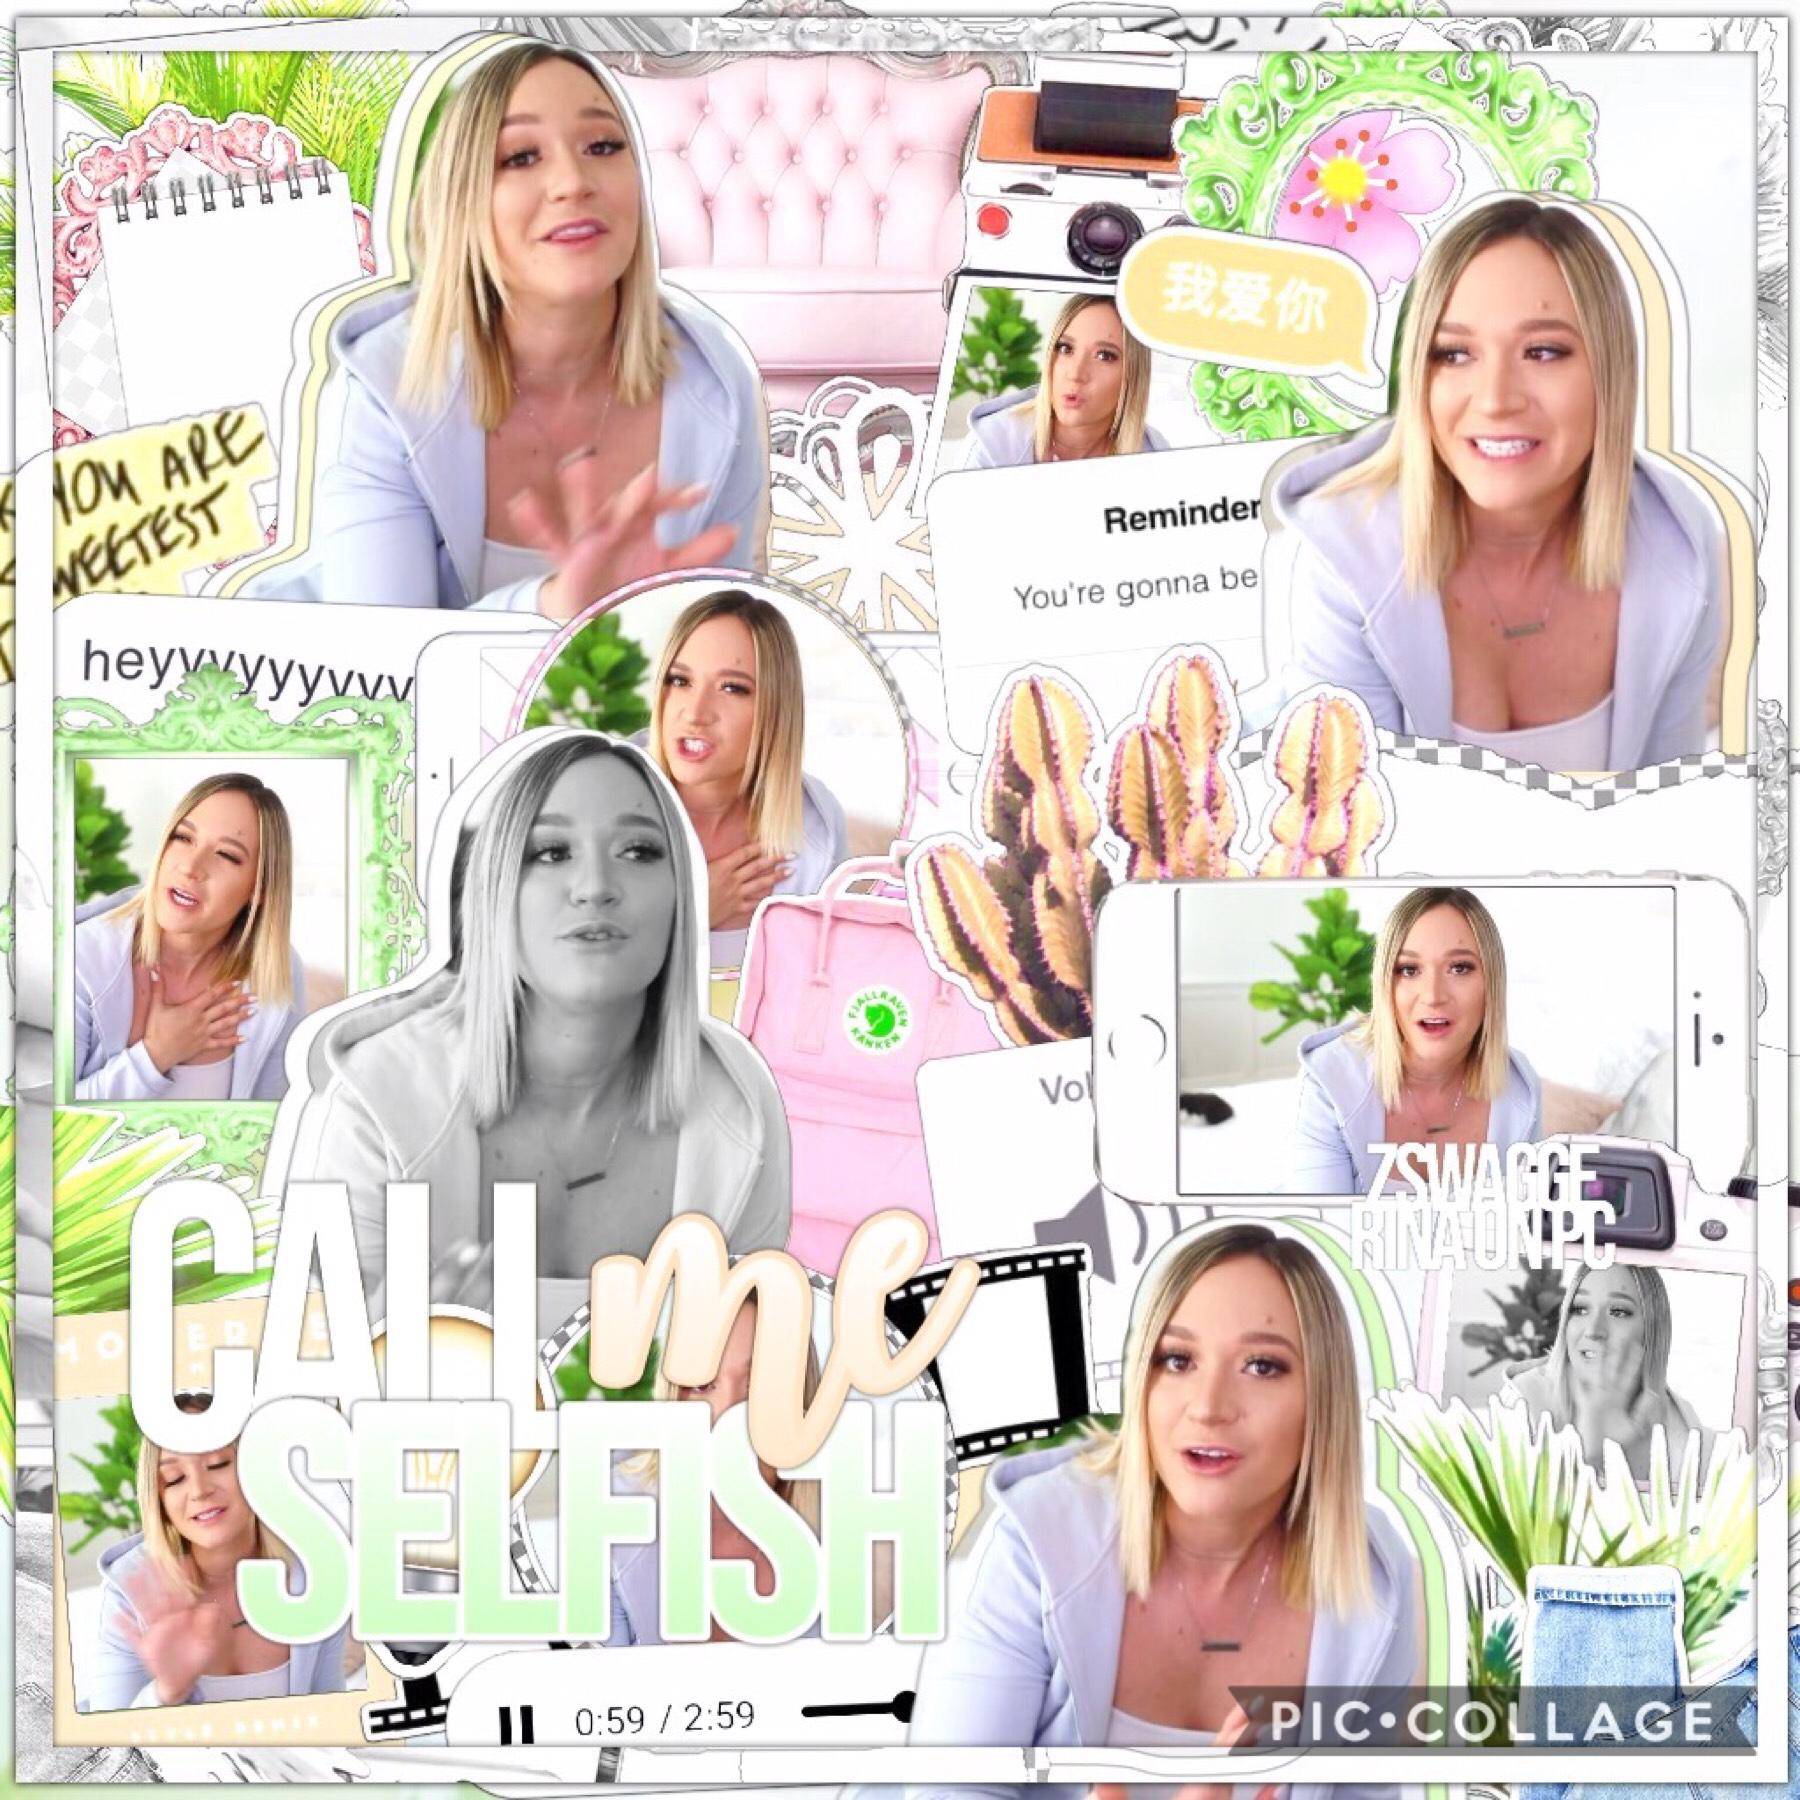 hiii, new edit! ☺️ ngl spring theme is my fave cause colors are sooo pale and pastel, I'm loving it! 🌩 so how has your weekend been? 🌵🌸 love you babes 